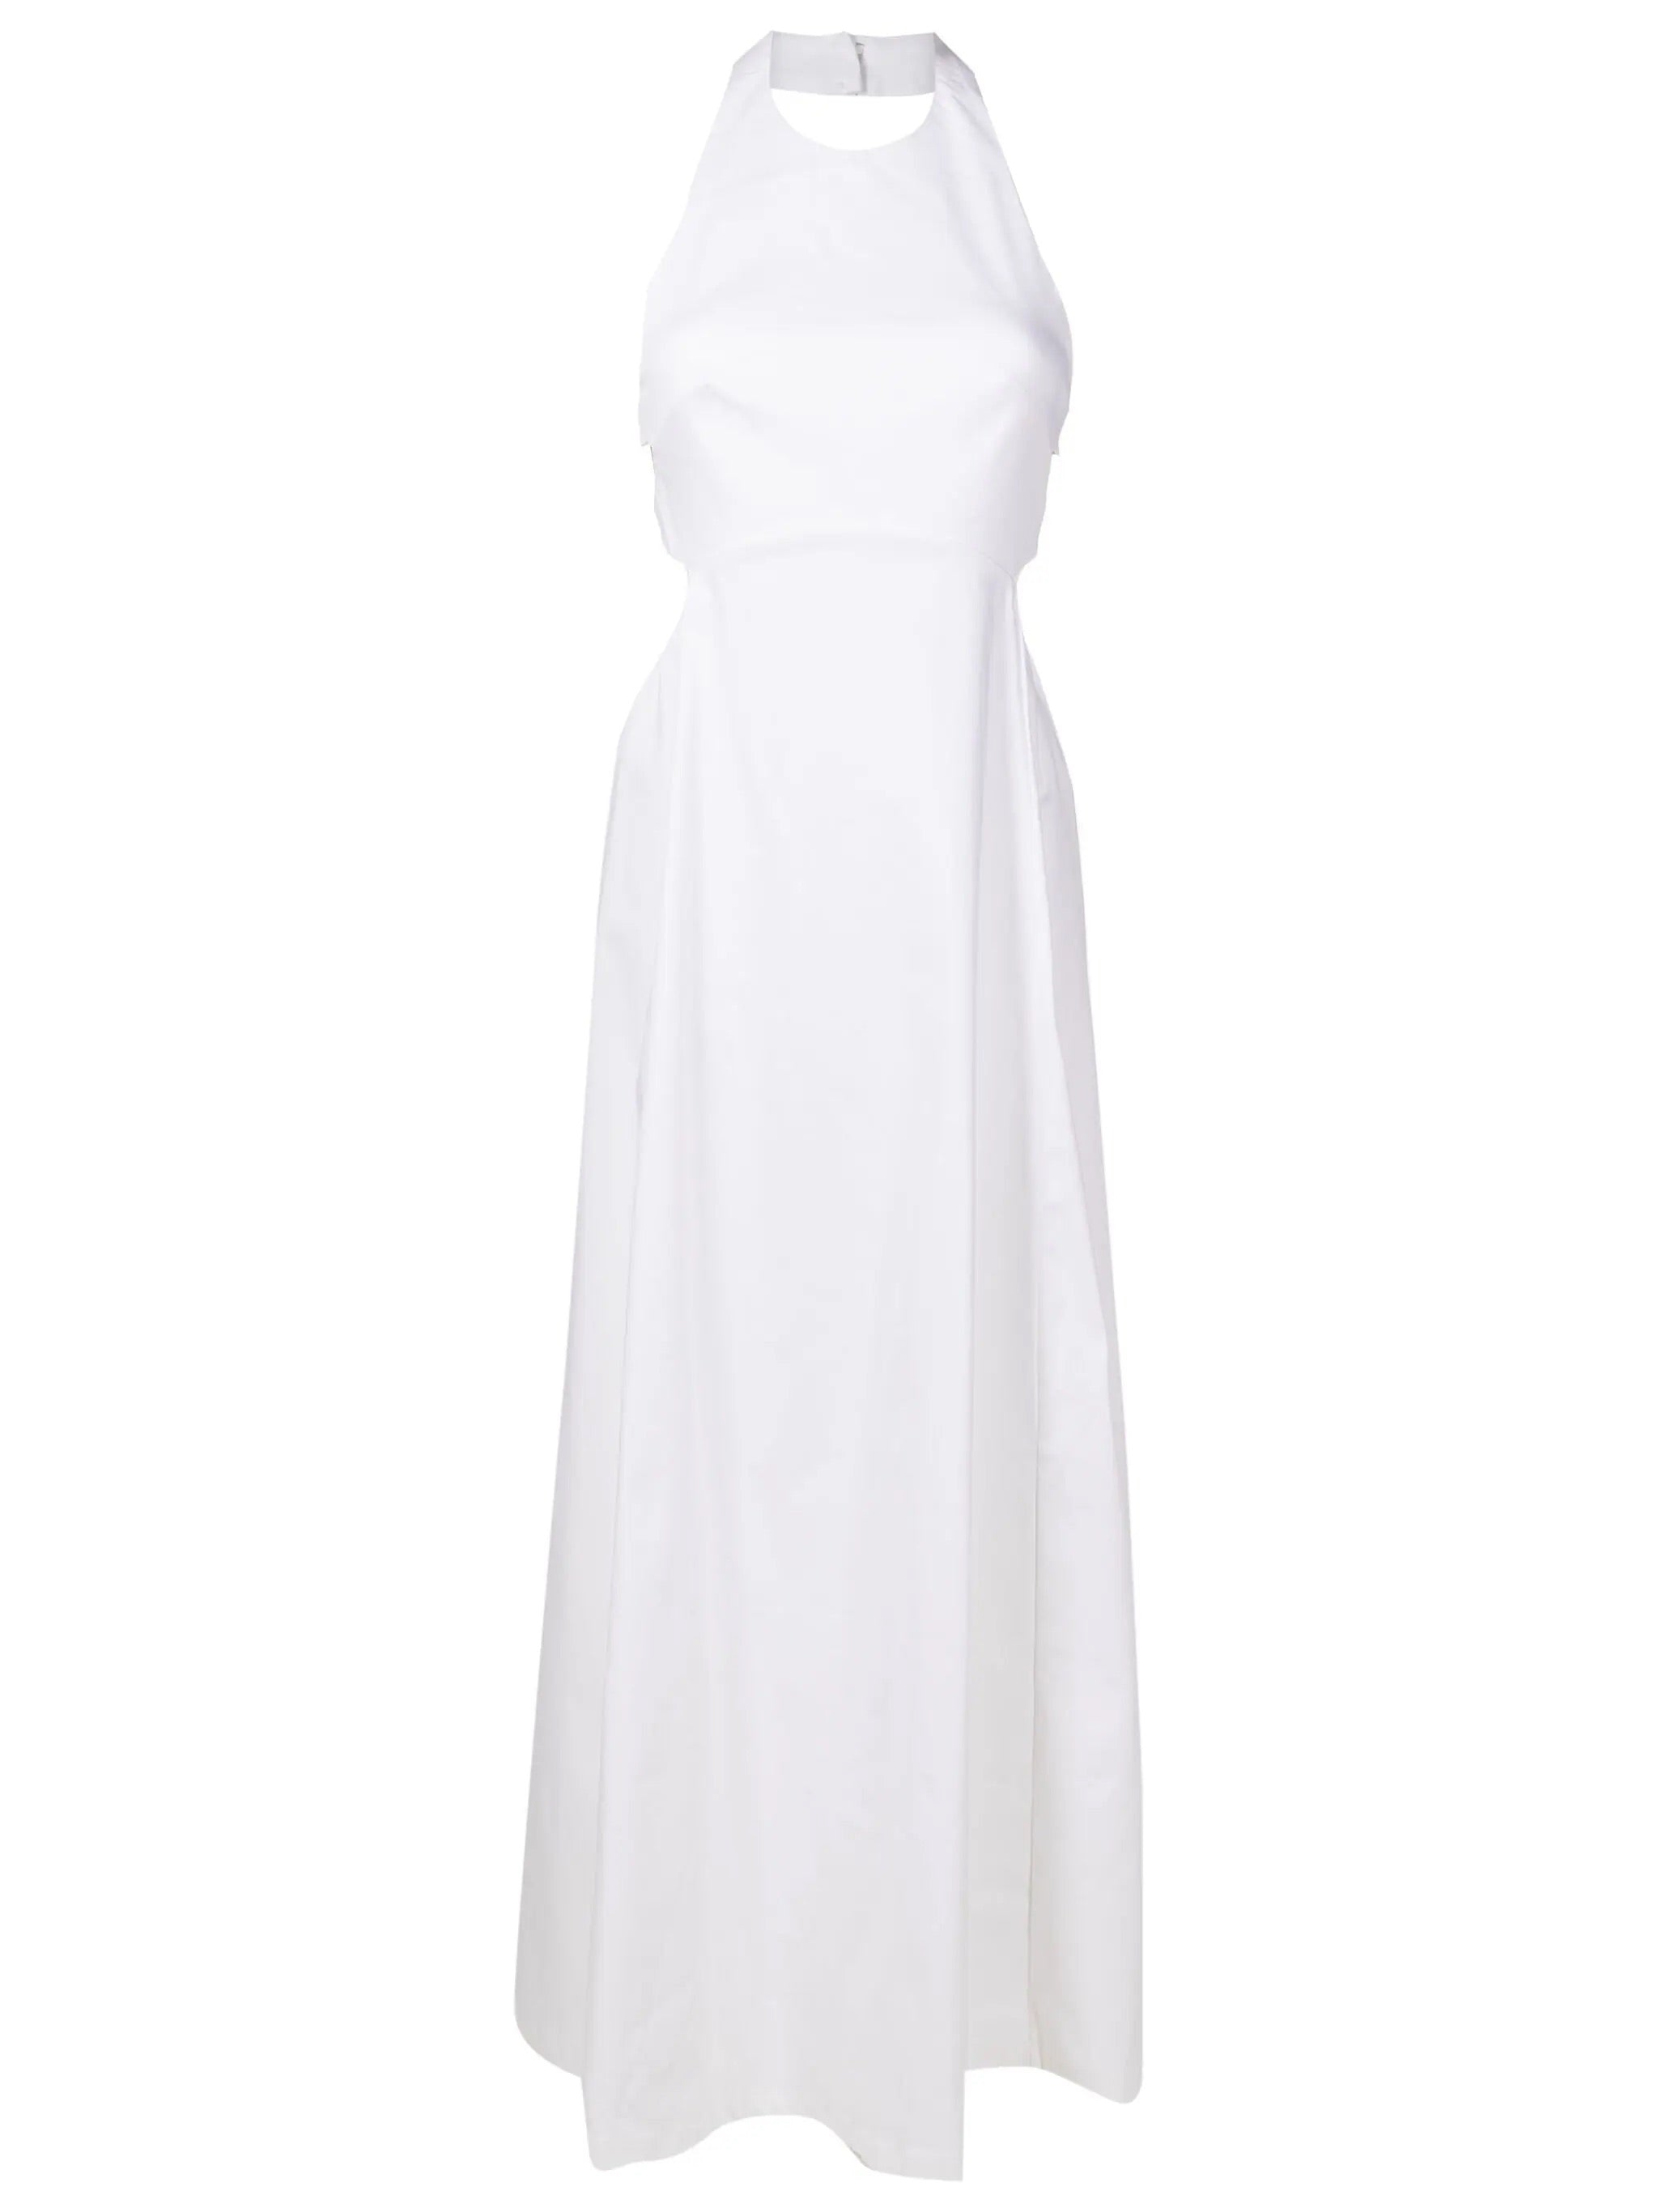 Off White Solid Cotton Long Dress Product